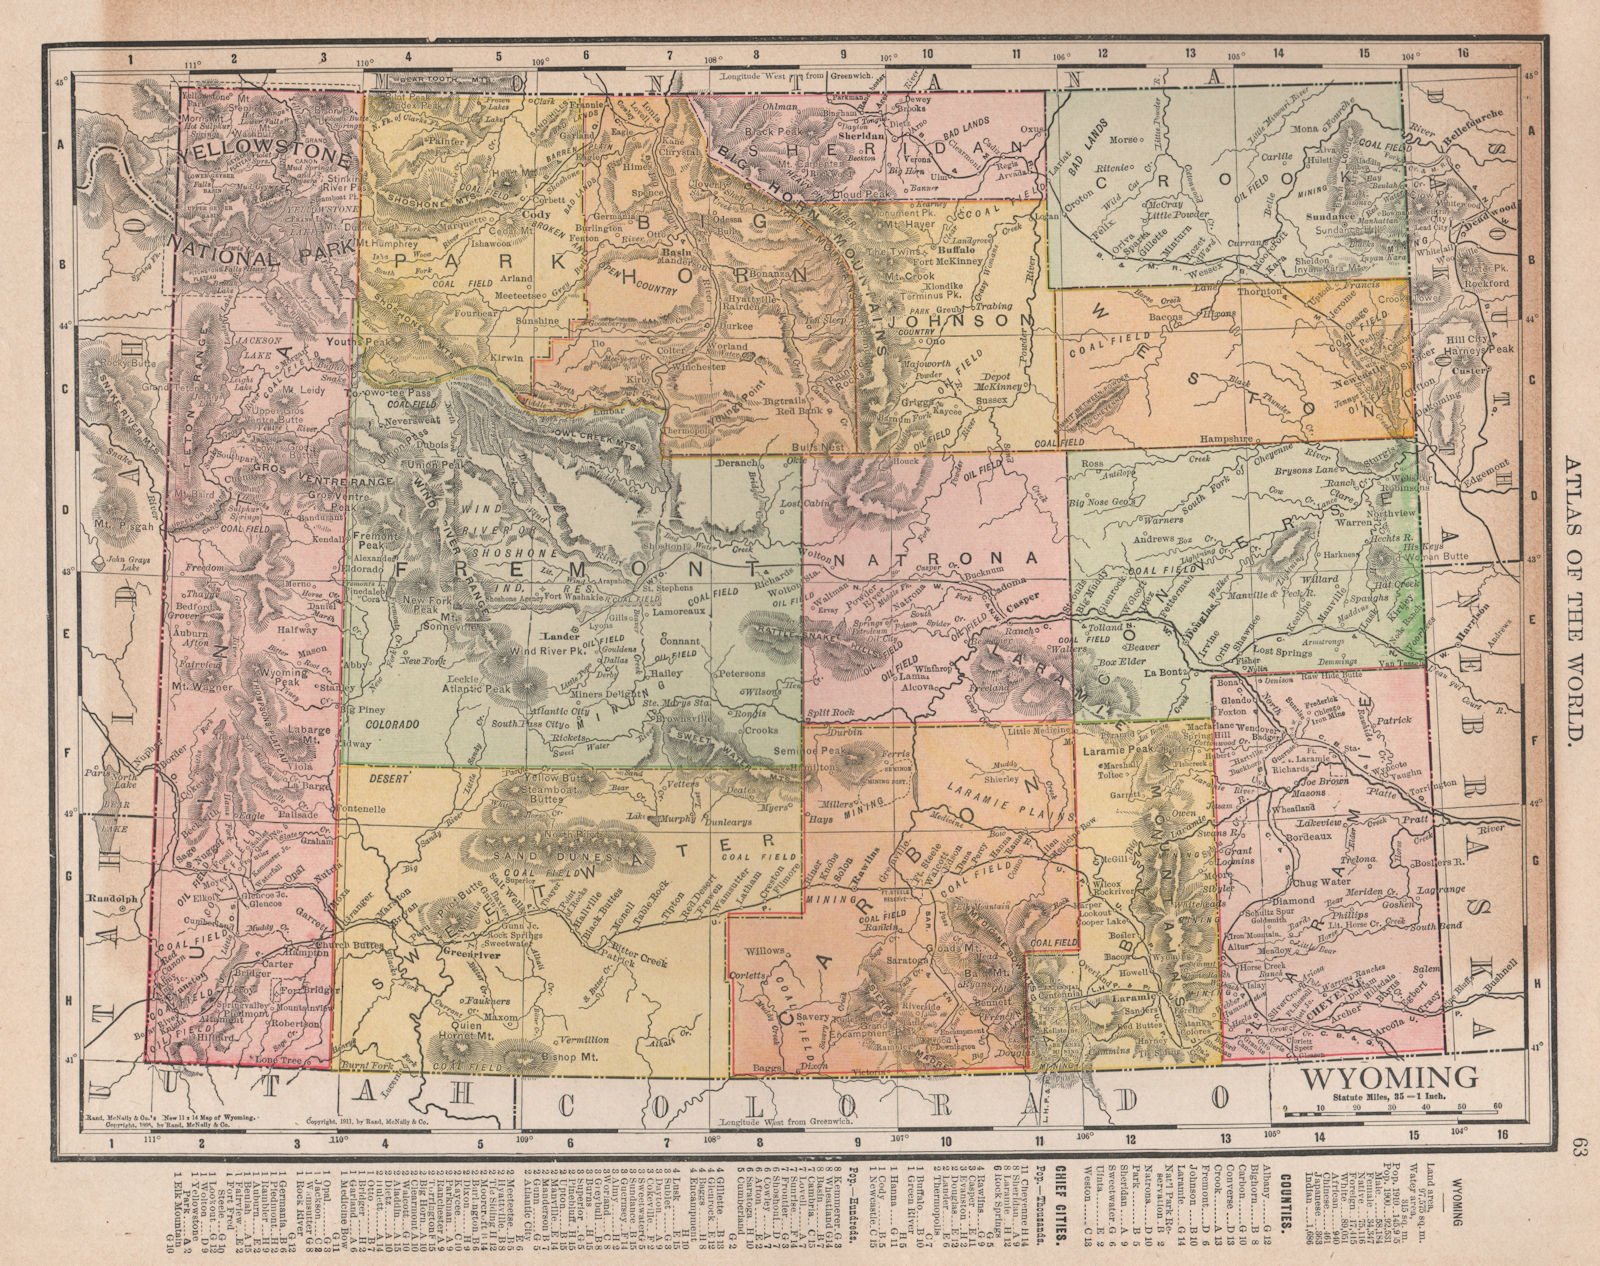 Associate Product Wyoming state map showing counties. Yellowstone. RAND MCNALLY 1912 old